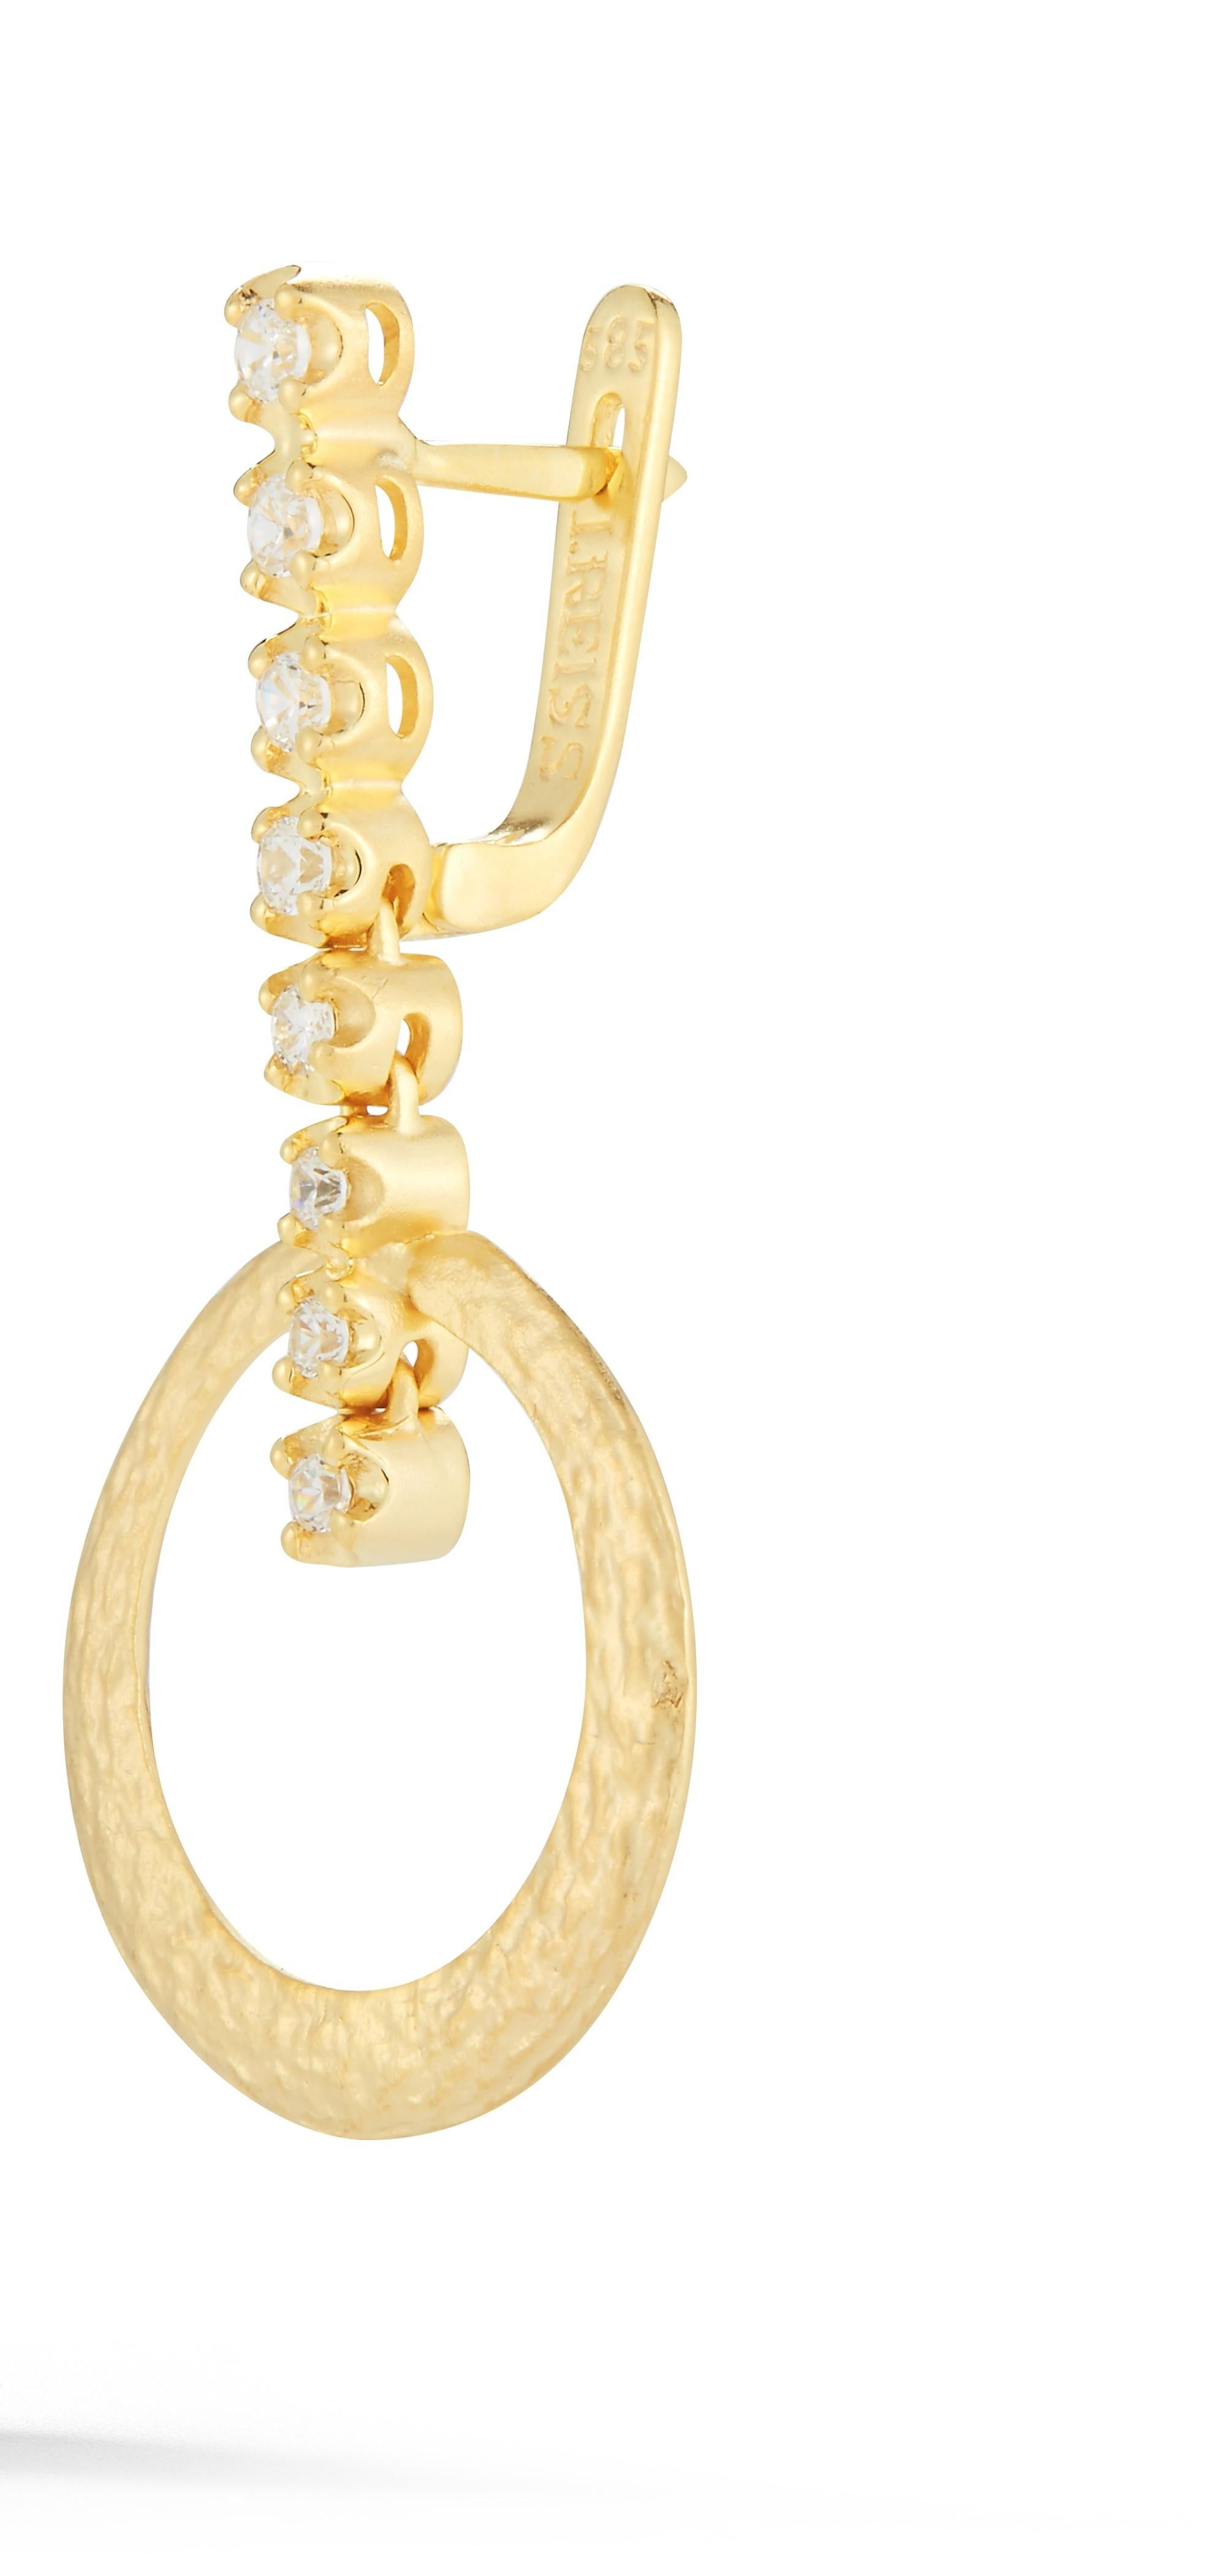 14 Karat Yellow Gold Hand-Crafted Matte and Textured Dangling Open Circle Earrings, Accented with 0.33 Carats of Prong Set Diamonds on a Leverback.
